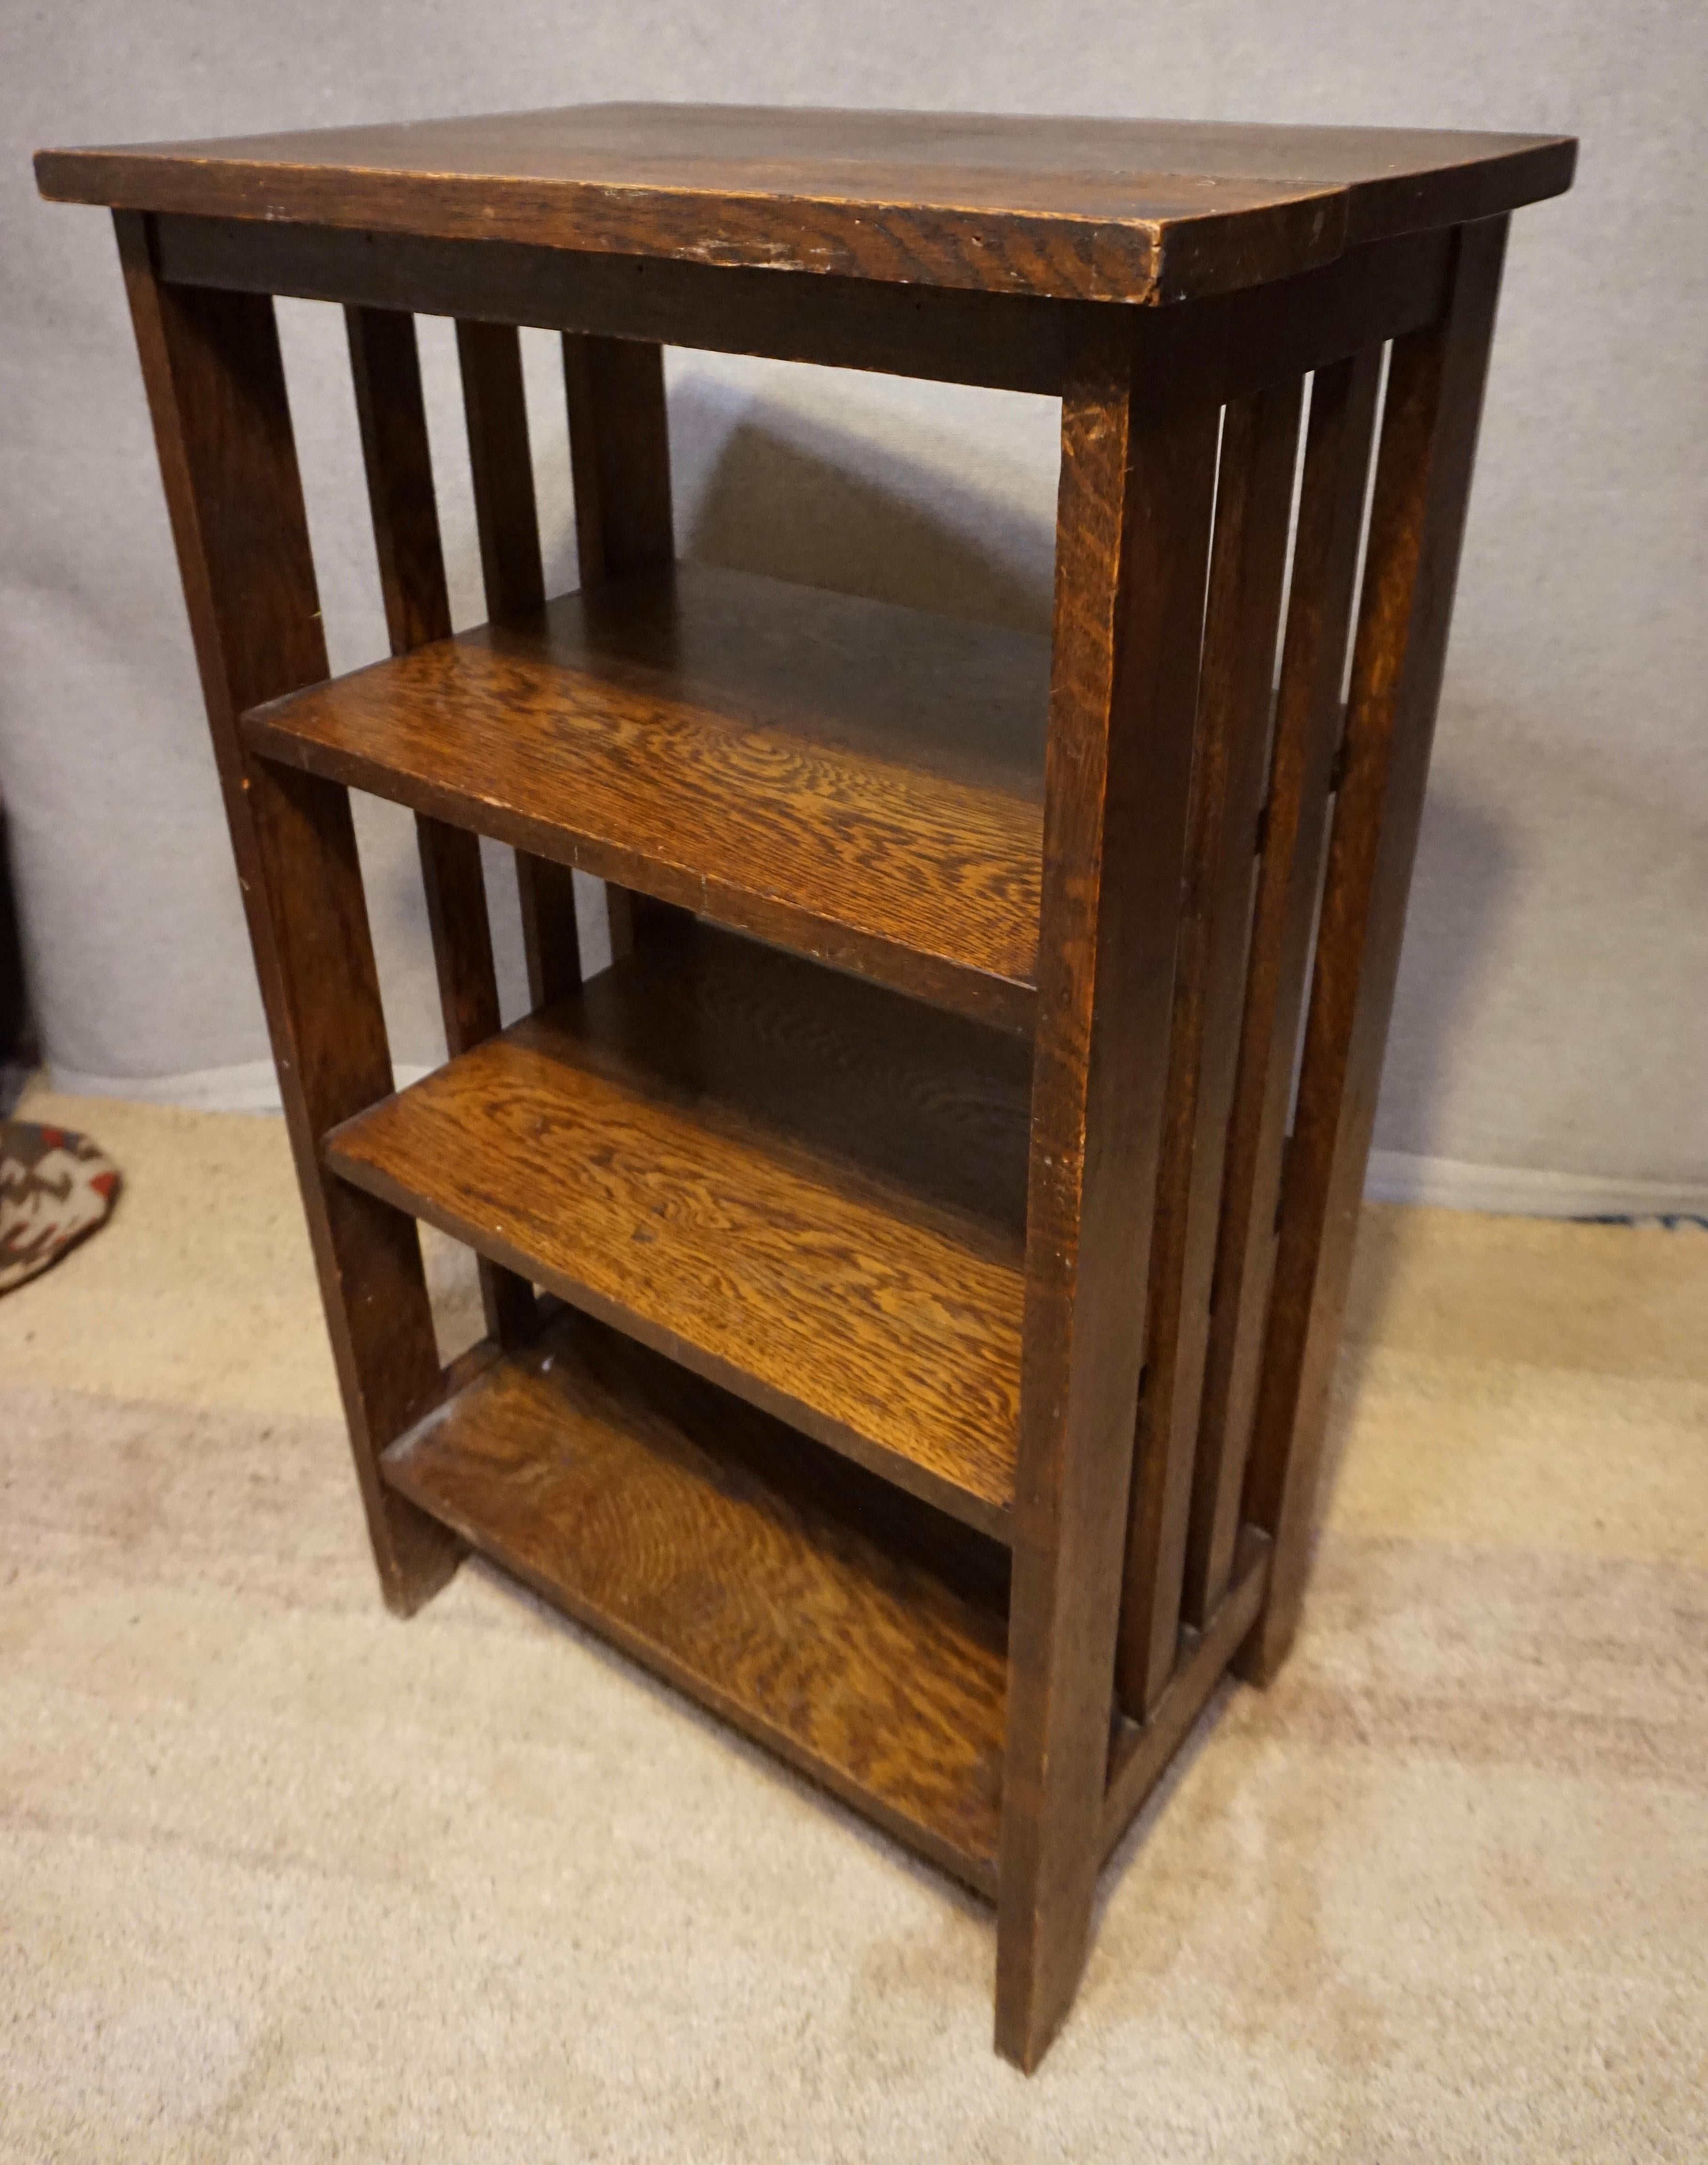 Arts & Crafts Handmade Dark Oak Compact 3 Tiered Bookshelf In Good Condition For Sale In Vancouver, British Columbia